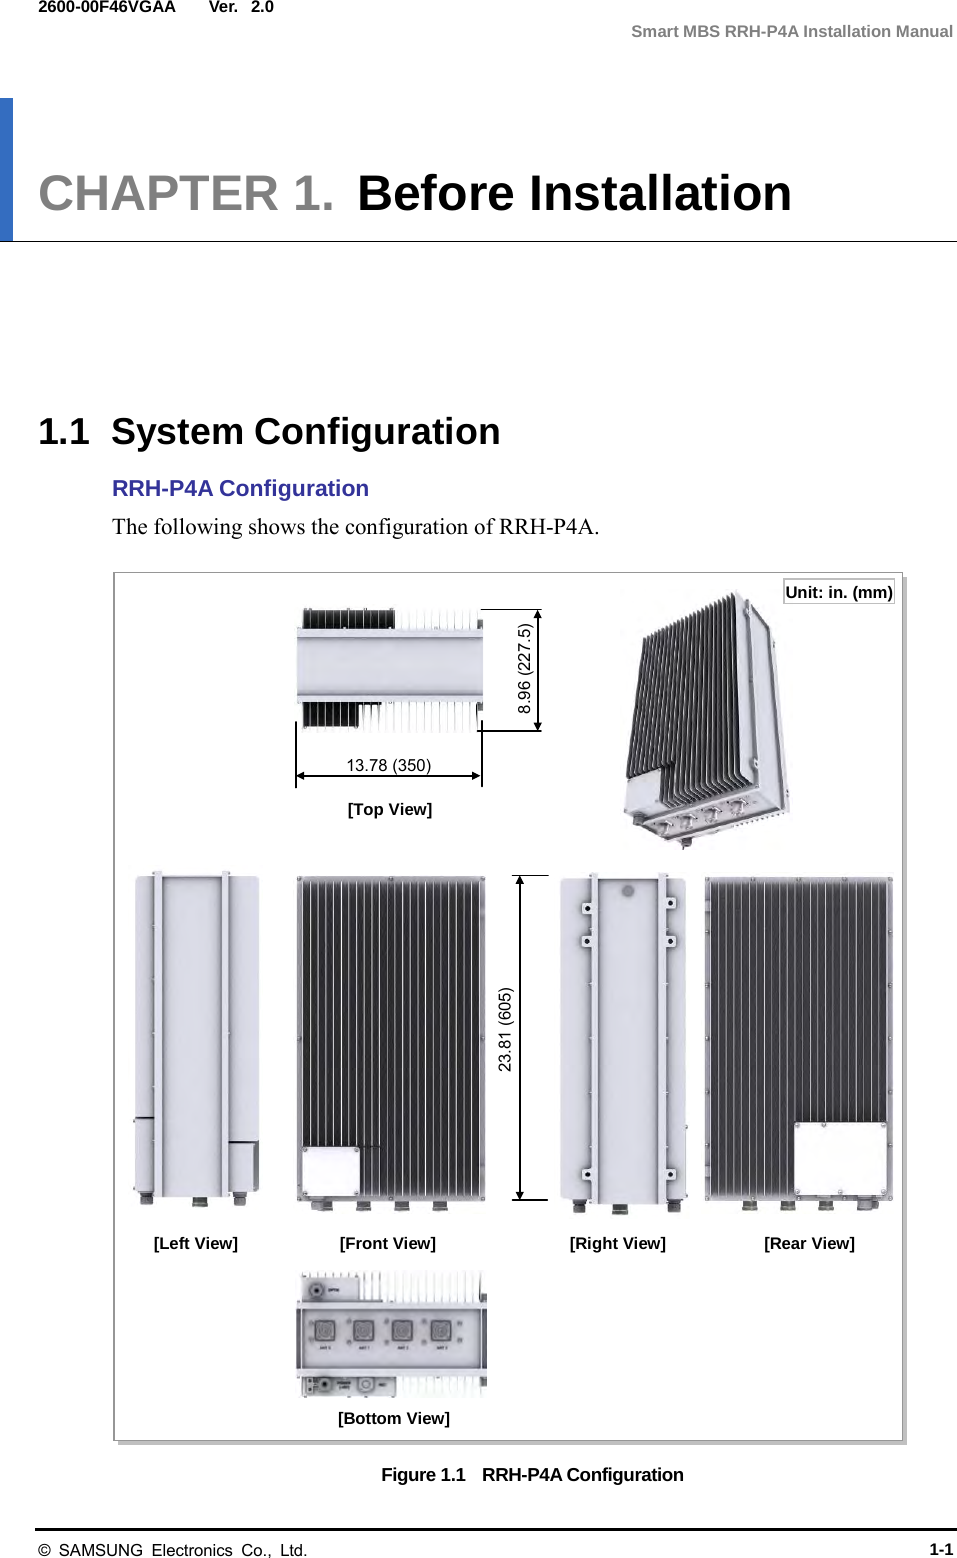  Ver.  Smart MBS RRH-P4A Installation Manual 2600-00F46VGAA 2.0 CHAPTER 1.  Before Installation      1.1 System Configuration RRH-P4A Configuration The following shows the configuration of RRH-P4A.  Figure 1.1  RRH-P4A Configuration [Top View] [Front View] [Bottom View] [Right View] [Left View] [Rear View] 23.81 (605) 8.96 (227.5) 13.78 (350) Unit: in. (mm) © SAMSUNG Electronics Co., Ltd. 1-1 